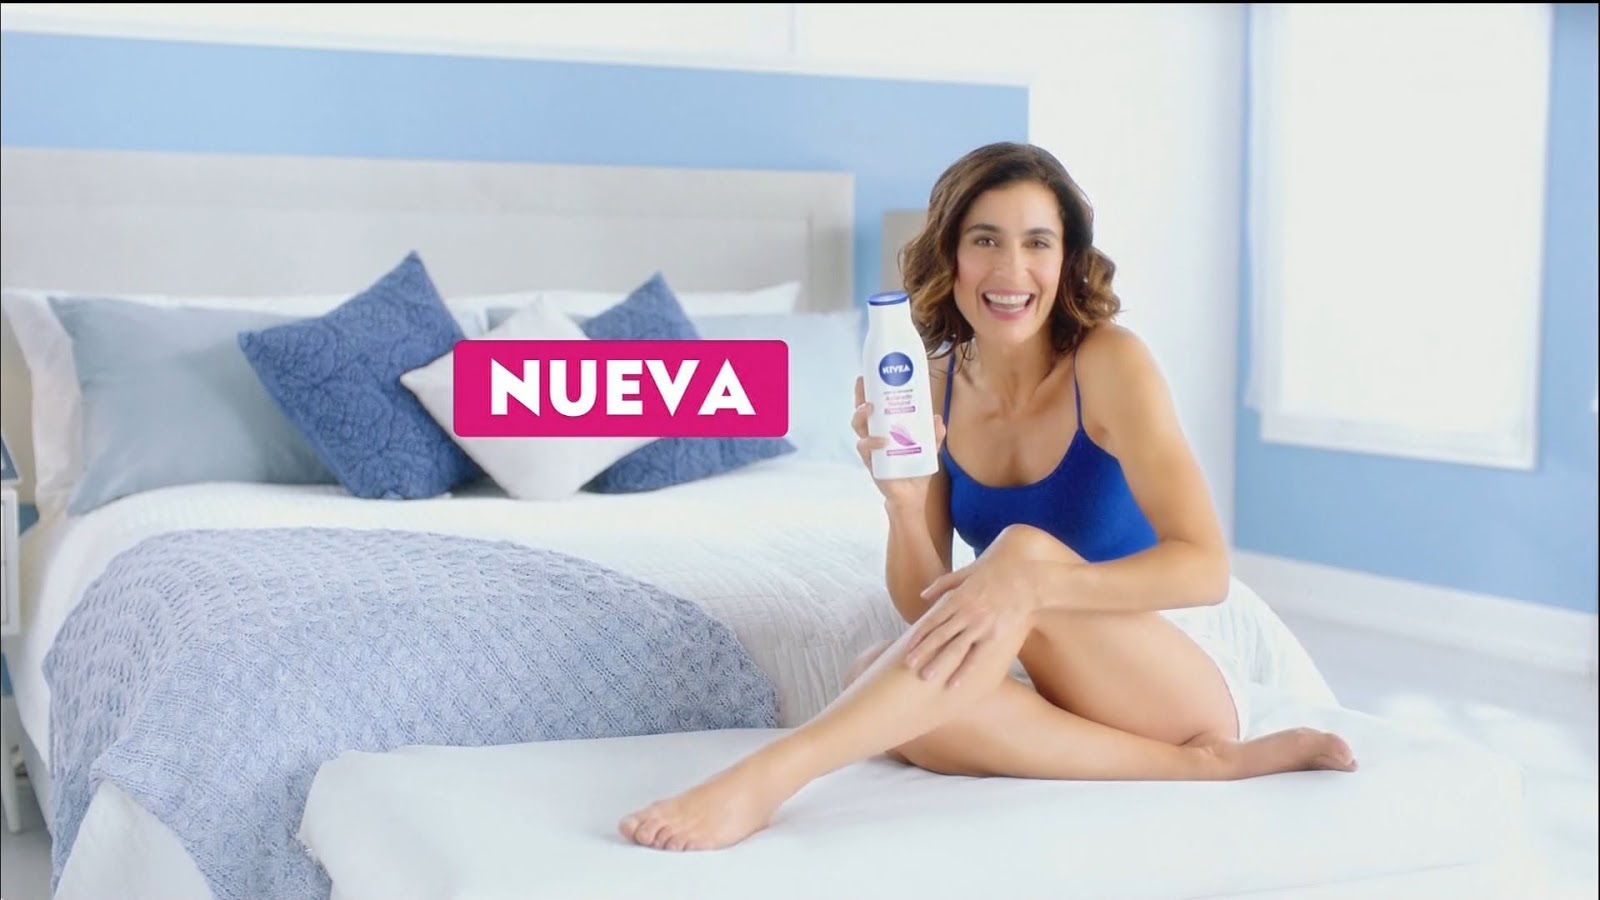 Nivea commercial but with naked women.